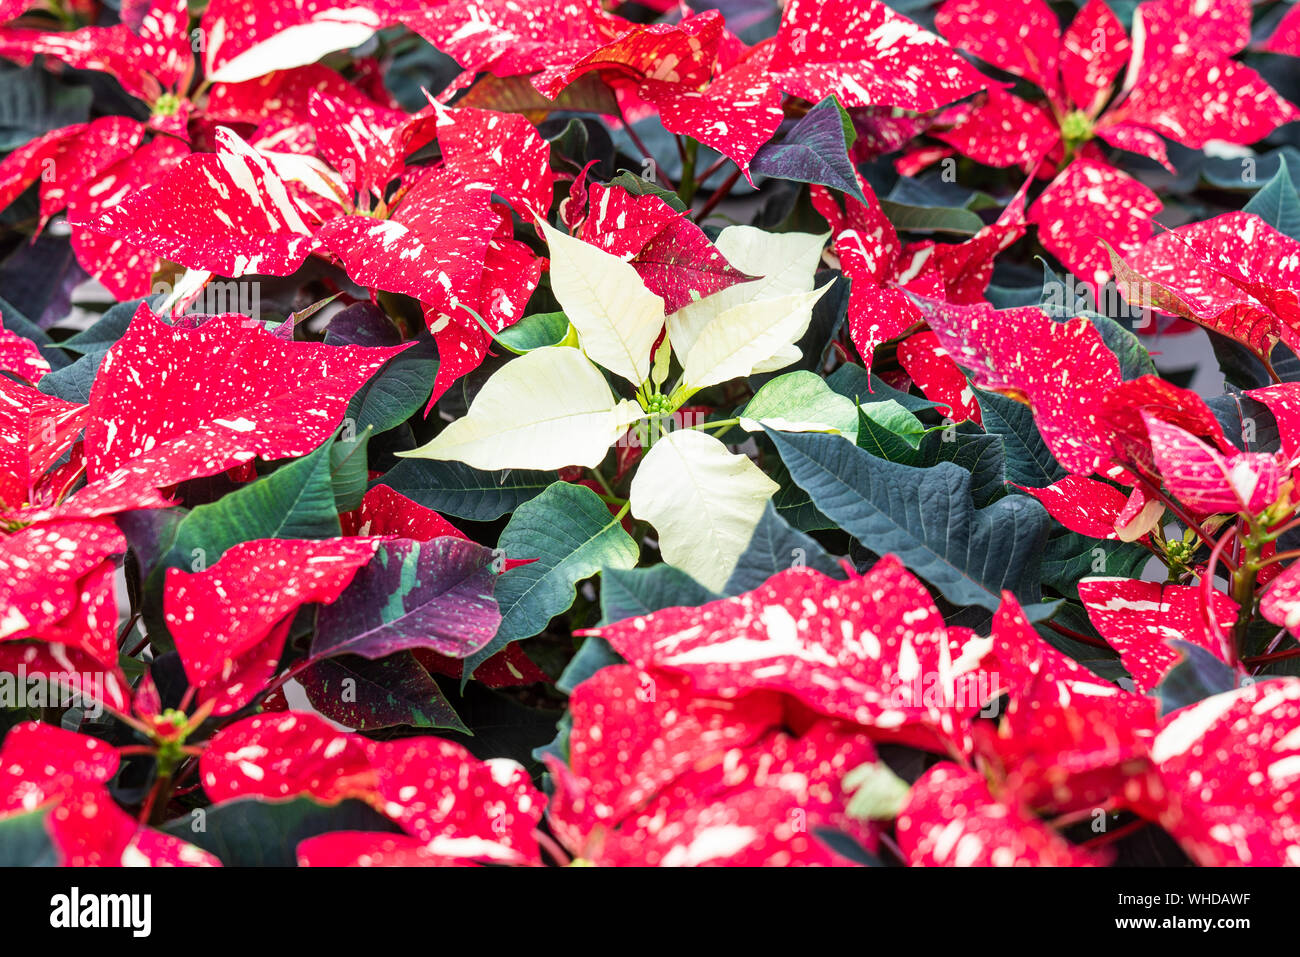 Close-up of white Poinsettia flower, aka Christmas Star (Euphorbia Pulcherrima) in field of red and white Poinsettias. Stock Photo